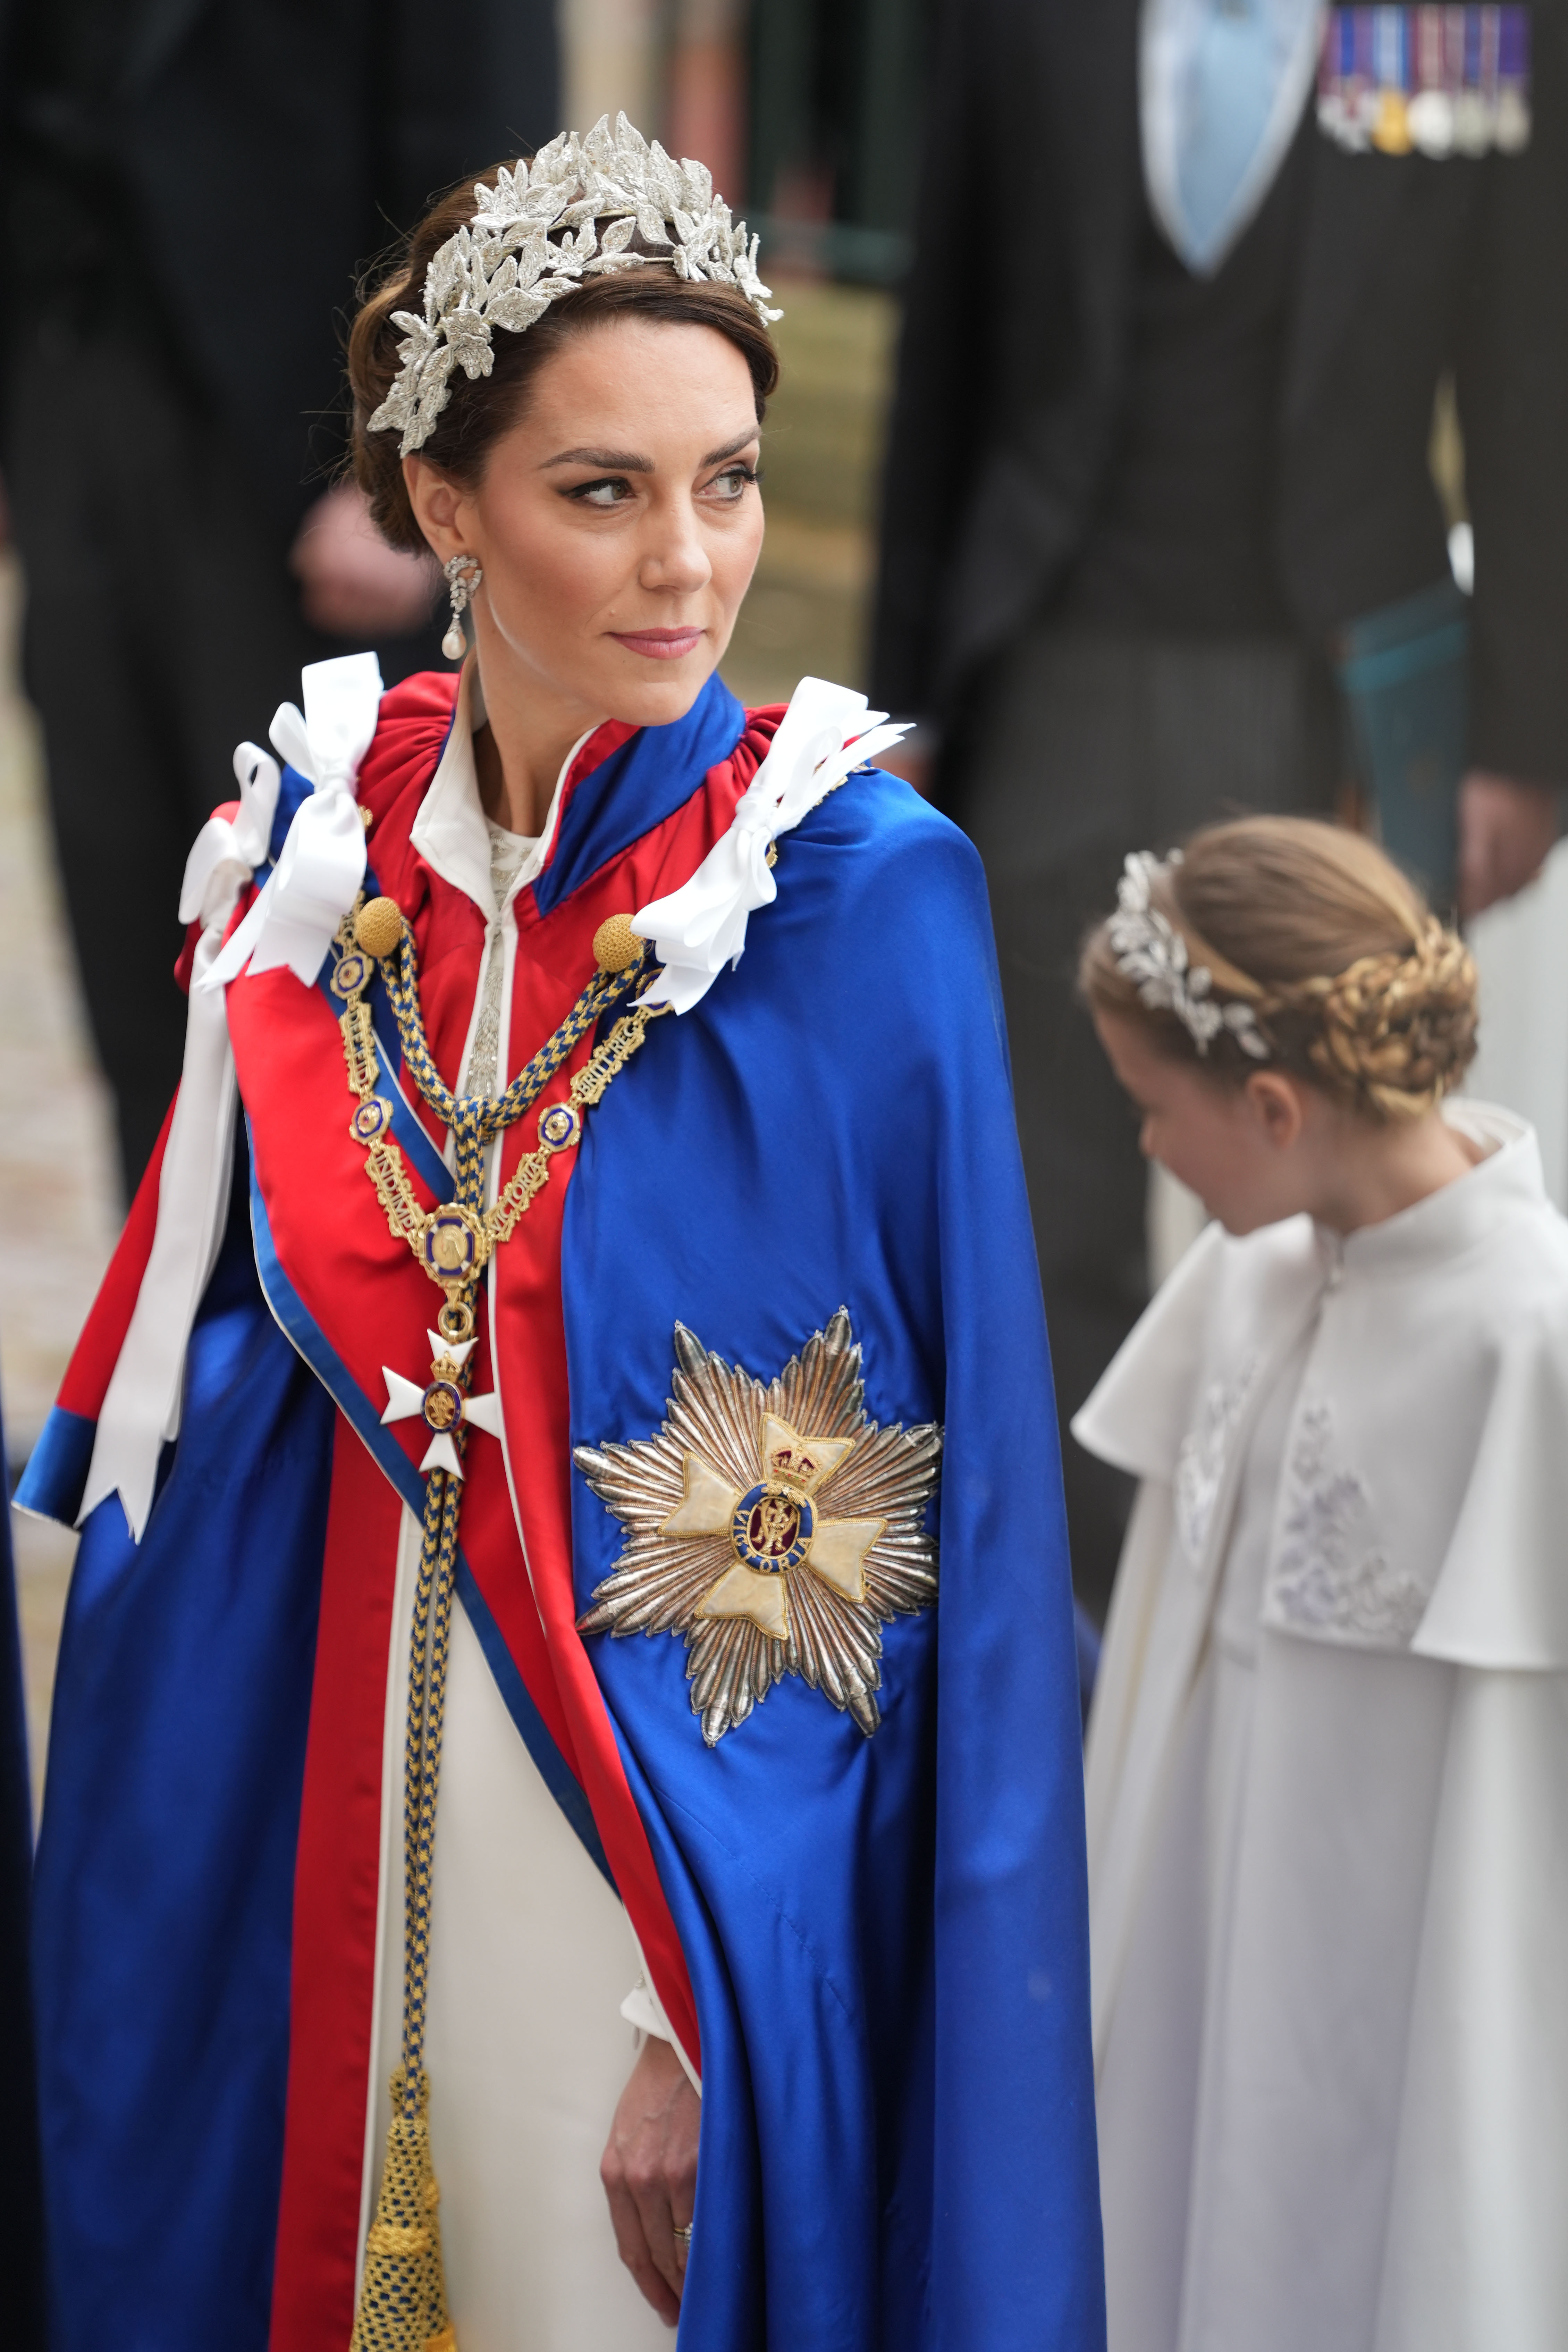 Catherine Middleton, Princess of Wales, during the Coronation of King Charles III and Queen Camilla in London, England on May 6, 2023 | Source: Getty Images